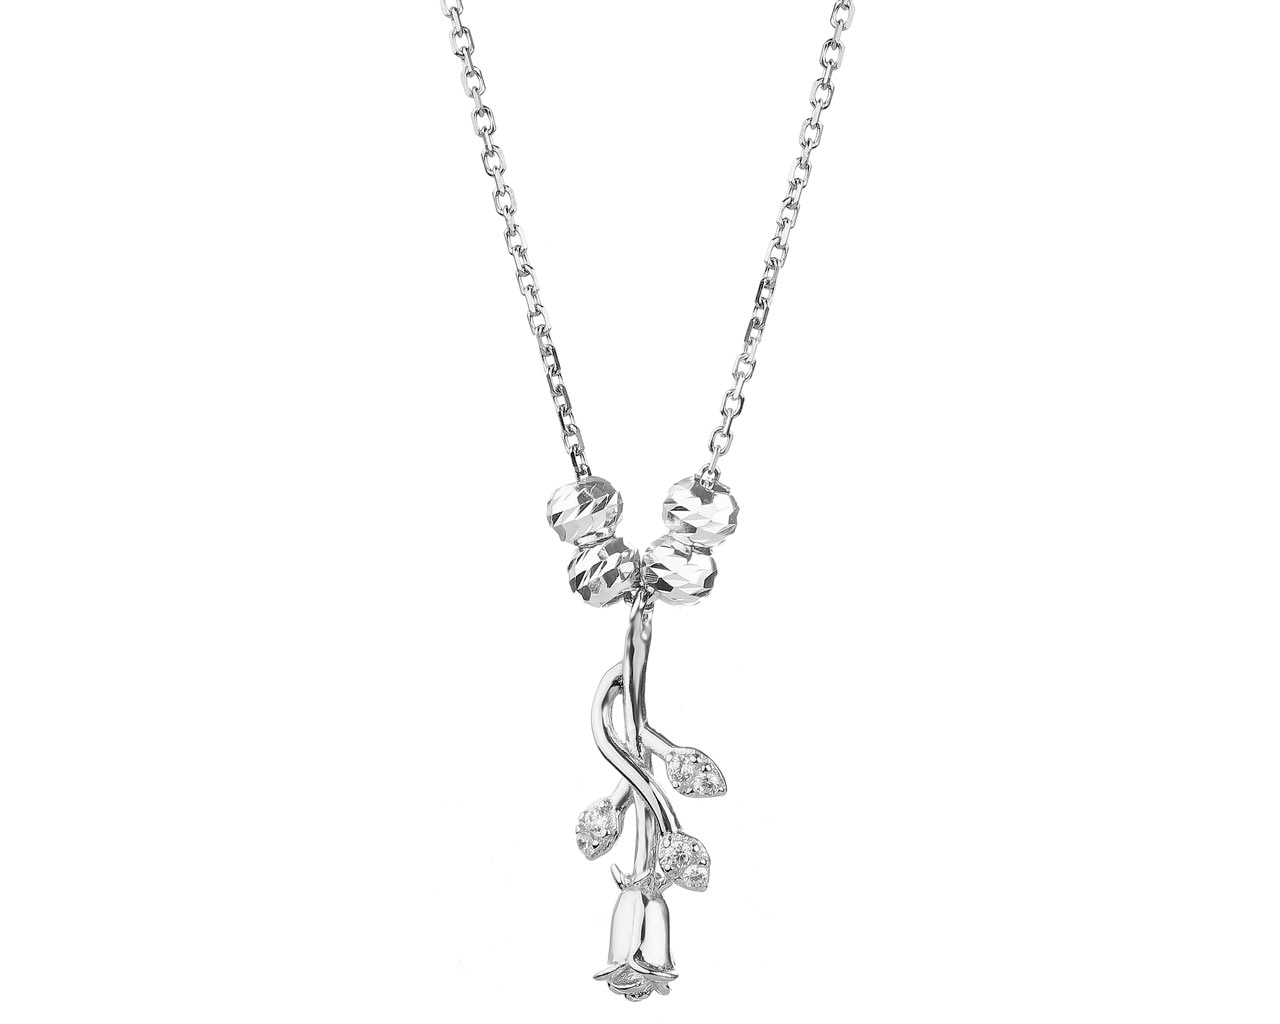 Sterling Silver Necklace with Cubic Zirconia - Rose, Balls